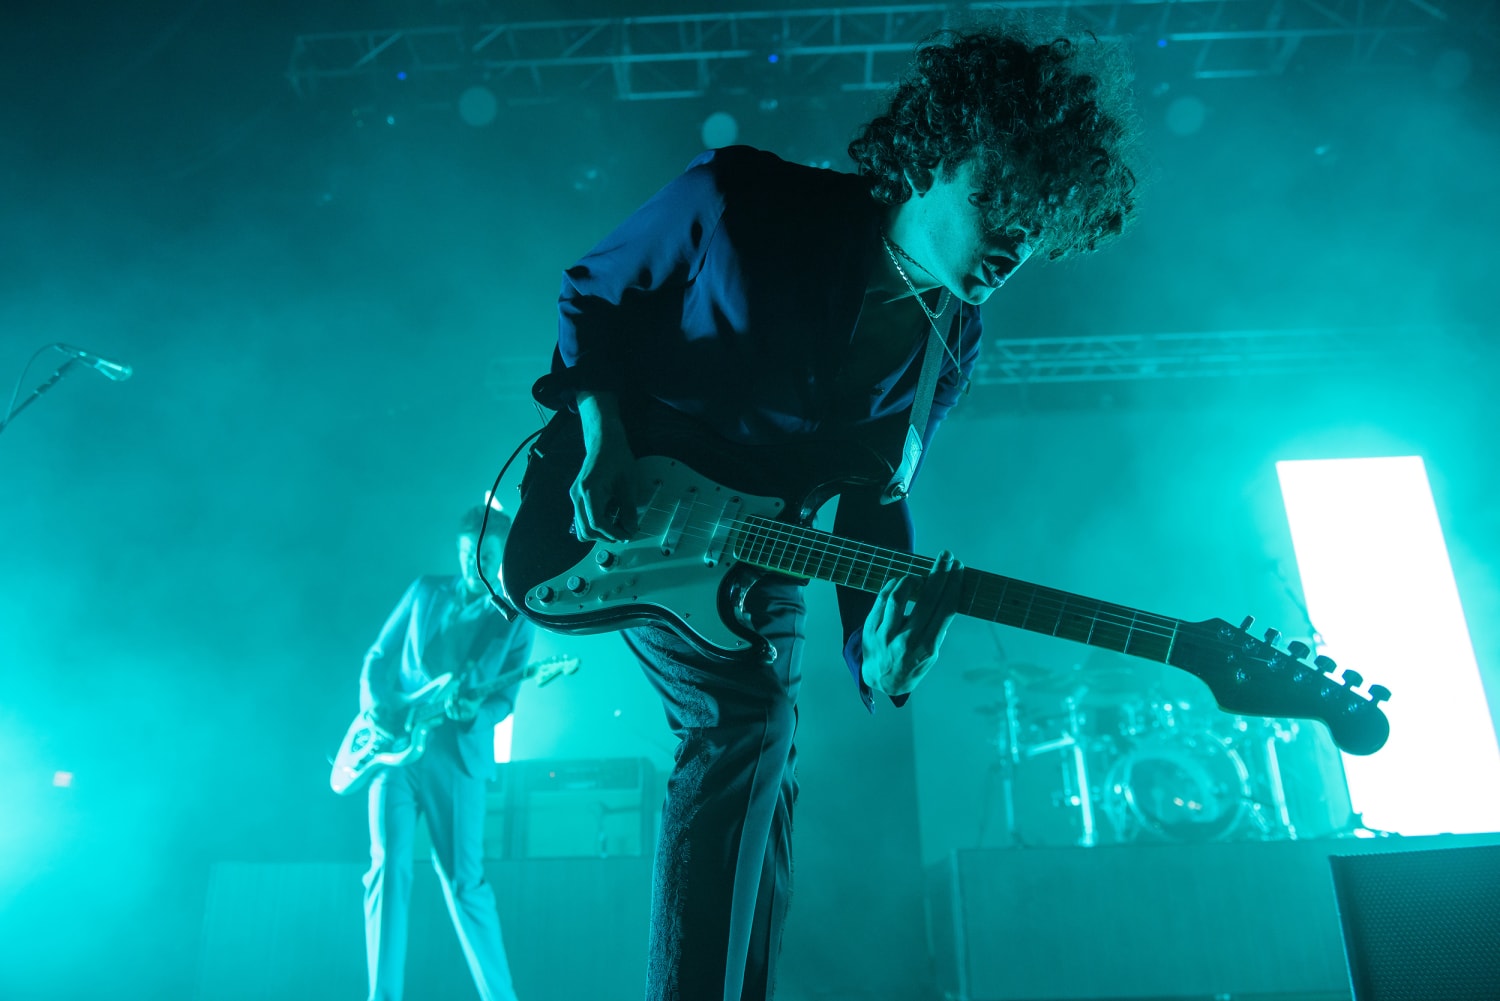 Matty Healy has angered fans way before those Ice Spice comments